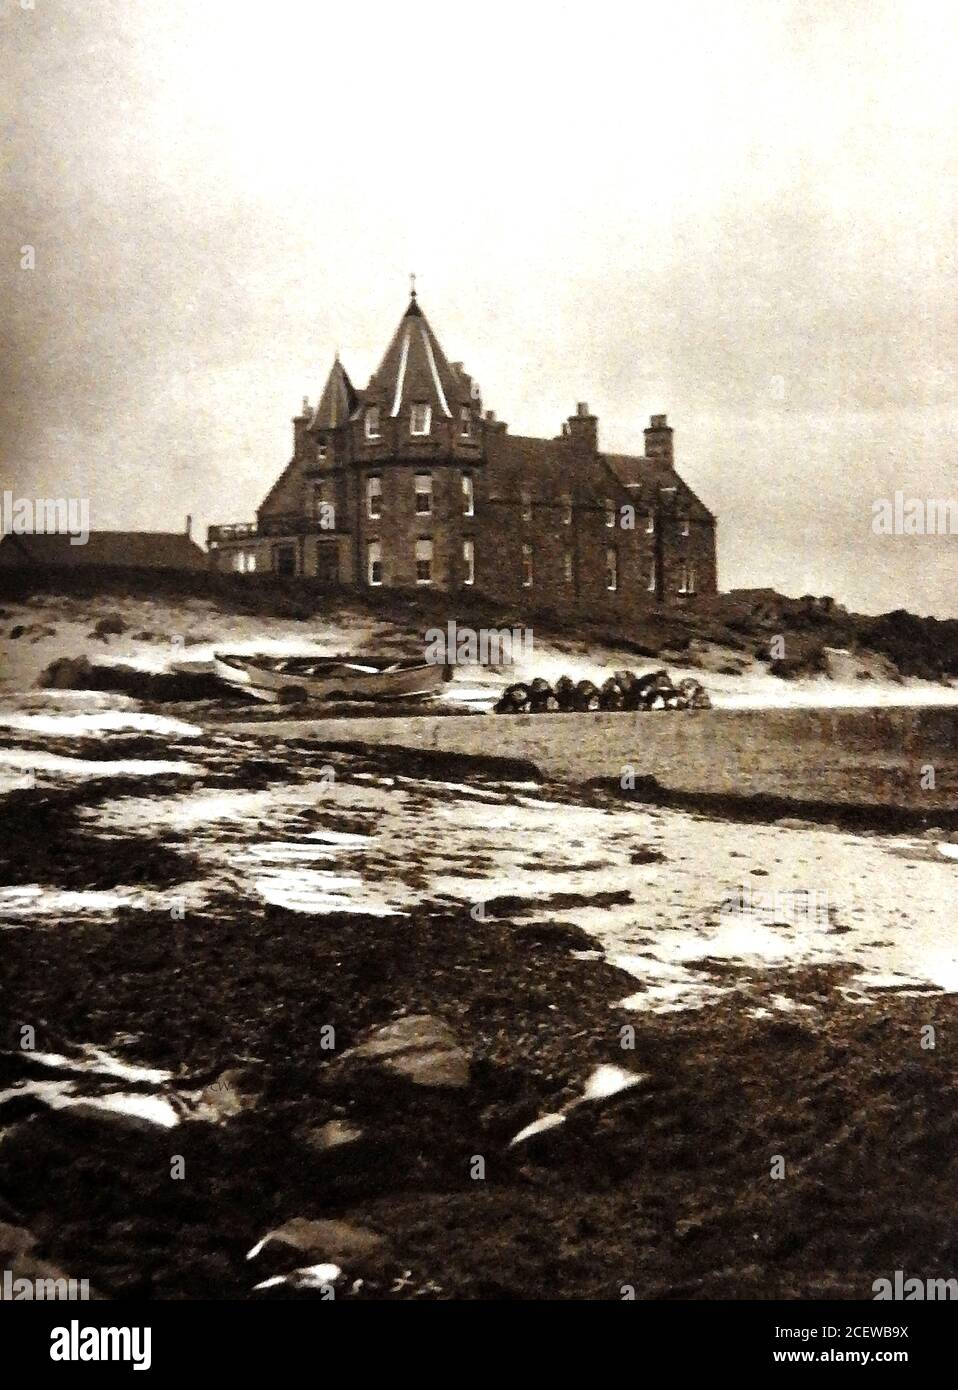 An old 1933 photograph of the  Seaview hotel at John O Groats, Scotland, (now the John o' Groats House Hotel / The Inn At John O’Groats) seen from the beach. John O'Groats  takes its name from  Jan de Groot, a 16th century Dutchman who once operated a ferry from the Scottish mainland to Orkney.In British culture, John O'Groats is linked with  Land's End (Cornwall) being at the extreme opposite end of the country. Bikers, walkers, motorists etc, often make the symbolic journey (either way) as a kind of non-religious pilgrimage, sometimes in order to raise cash for charity fundraising Stock Photo